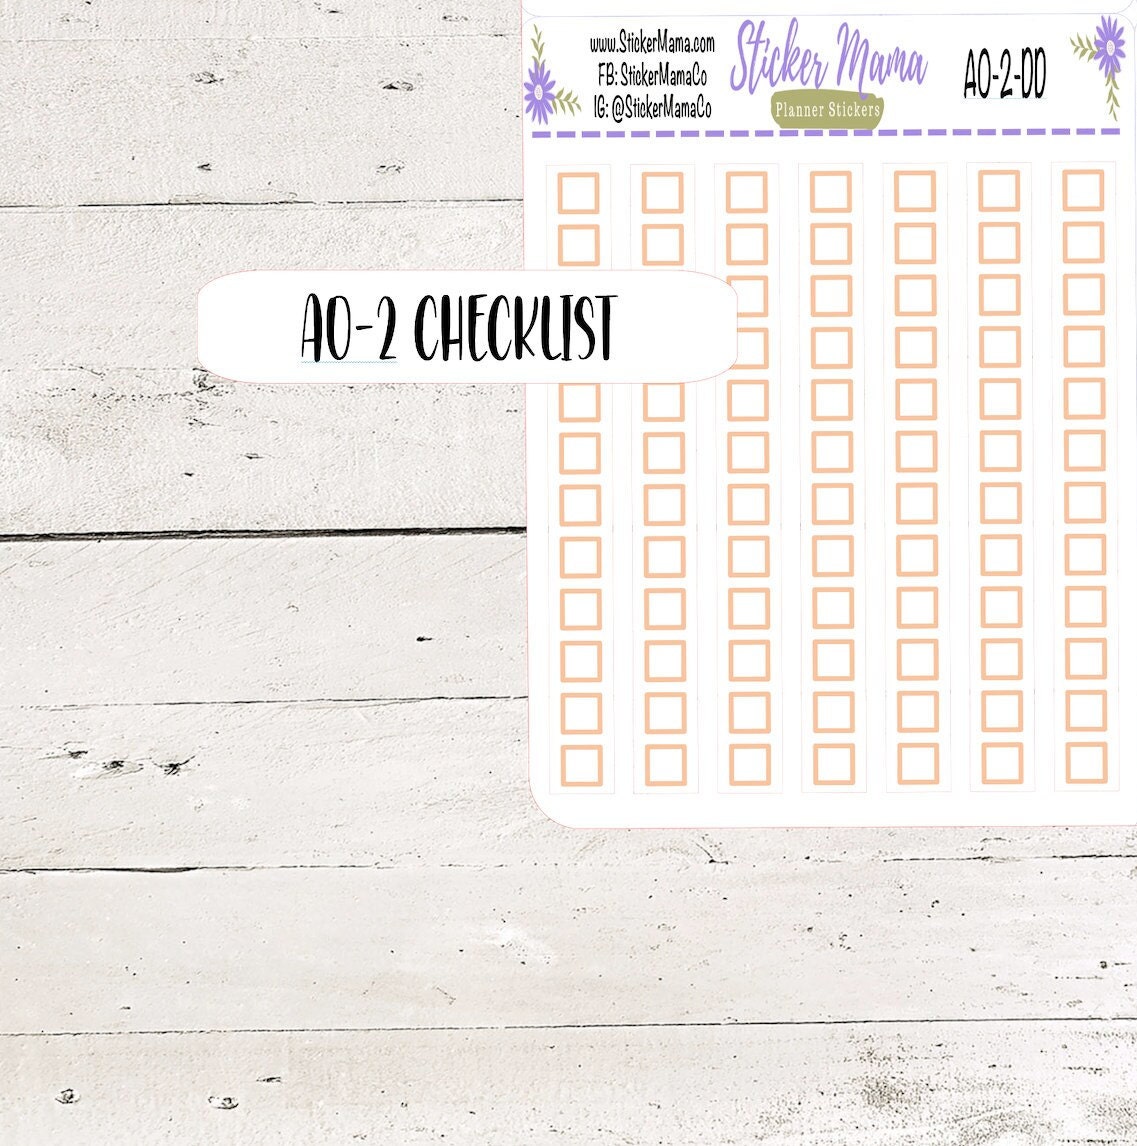 NEW Daily Duo 7x9-3079 - PUMPKINS October Stickers Planner Stickers - Daily Duo 7x9 Planner - Daily Duo Stickers - Daily Planner